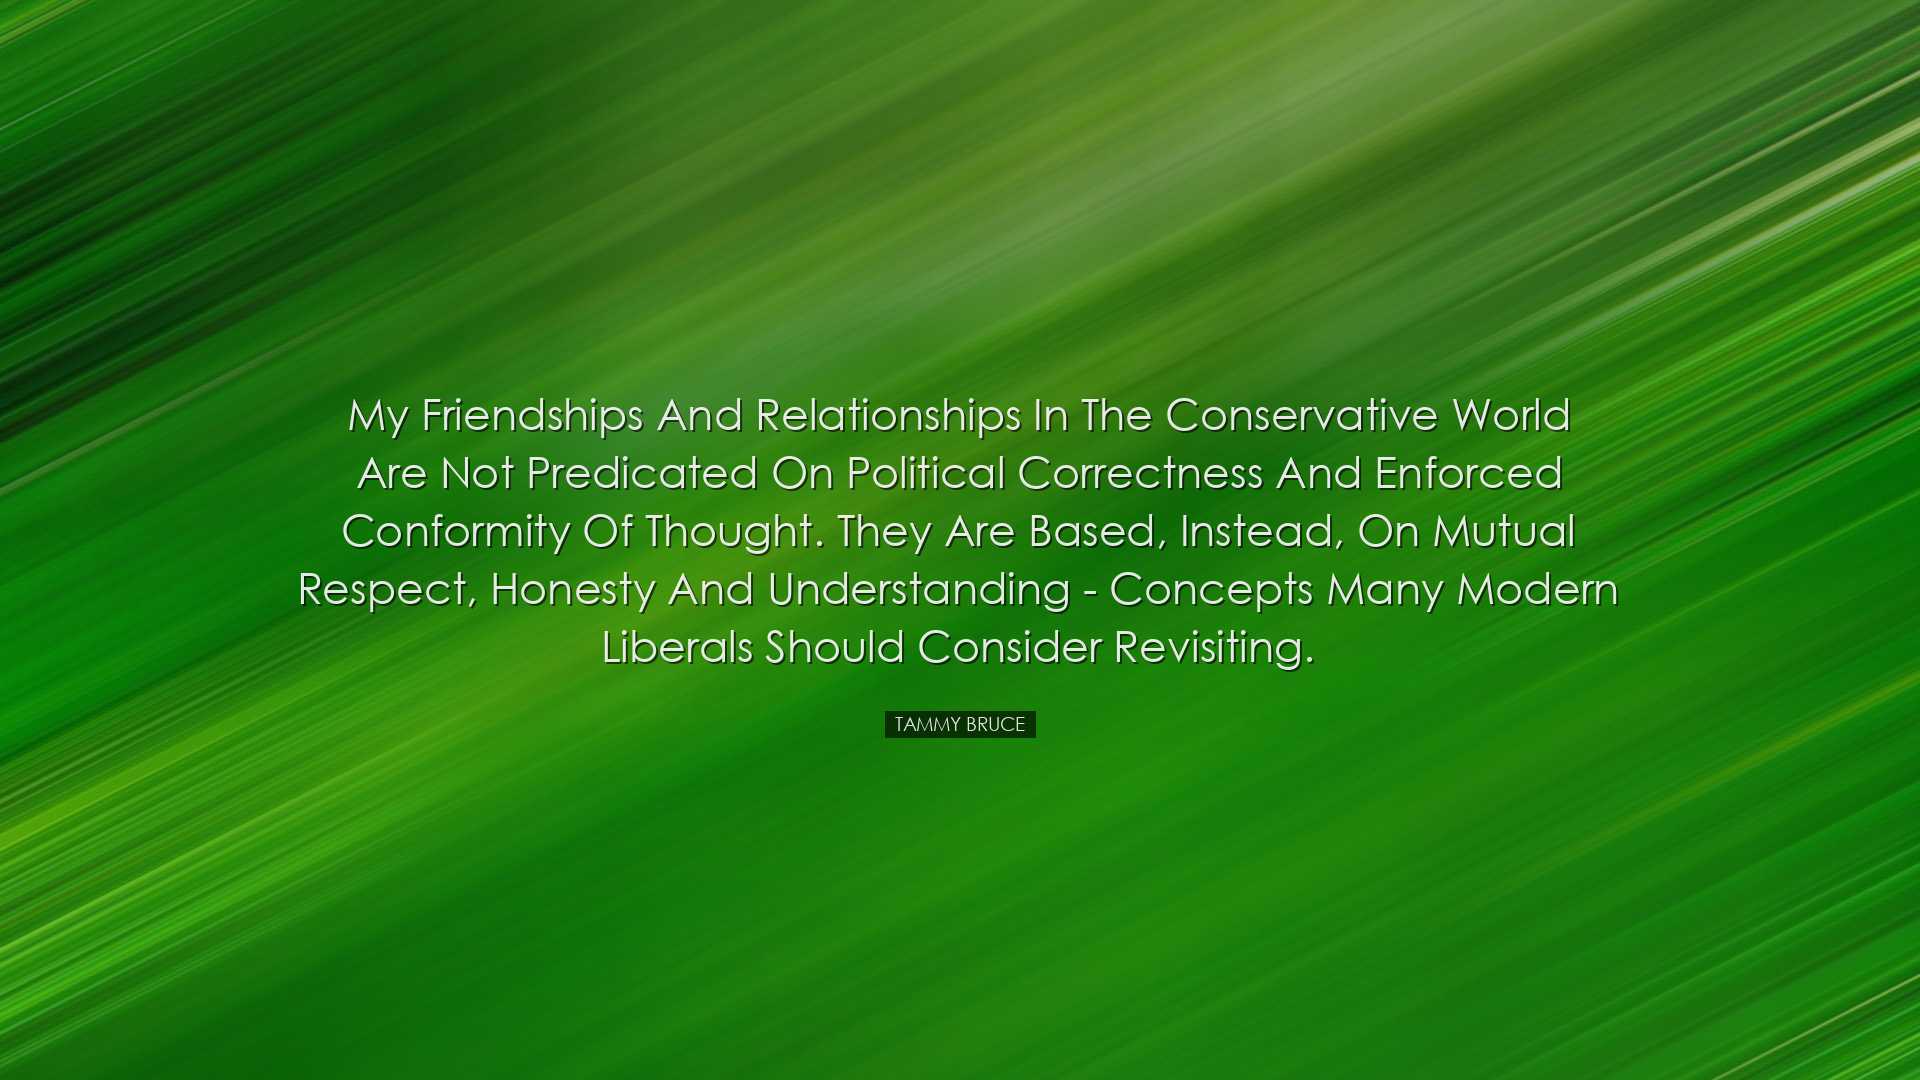 My friendships and relationships in the conservative world are not